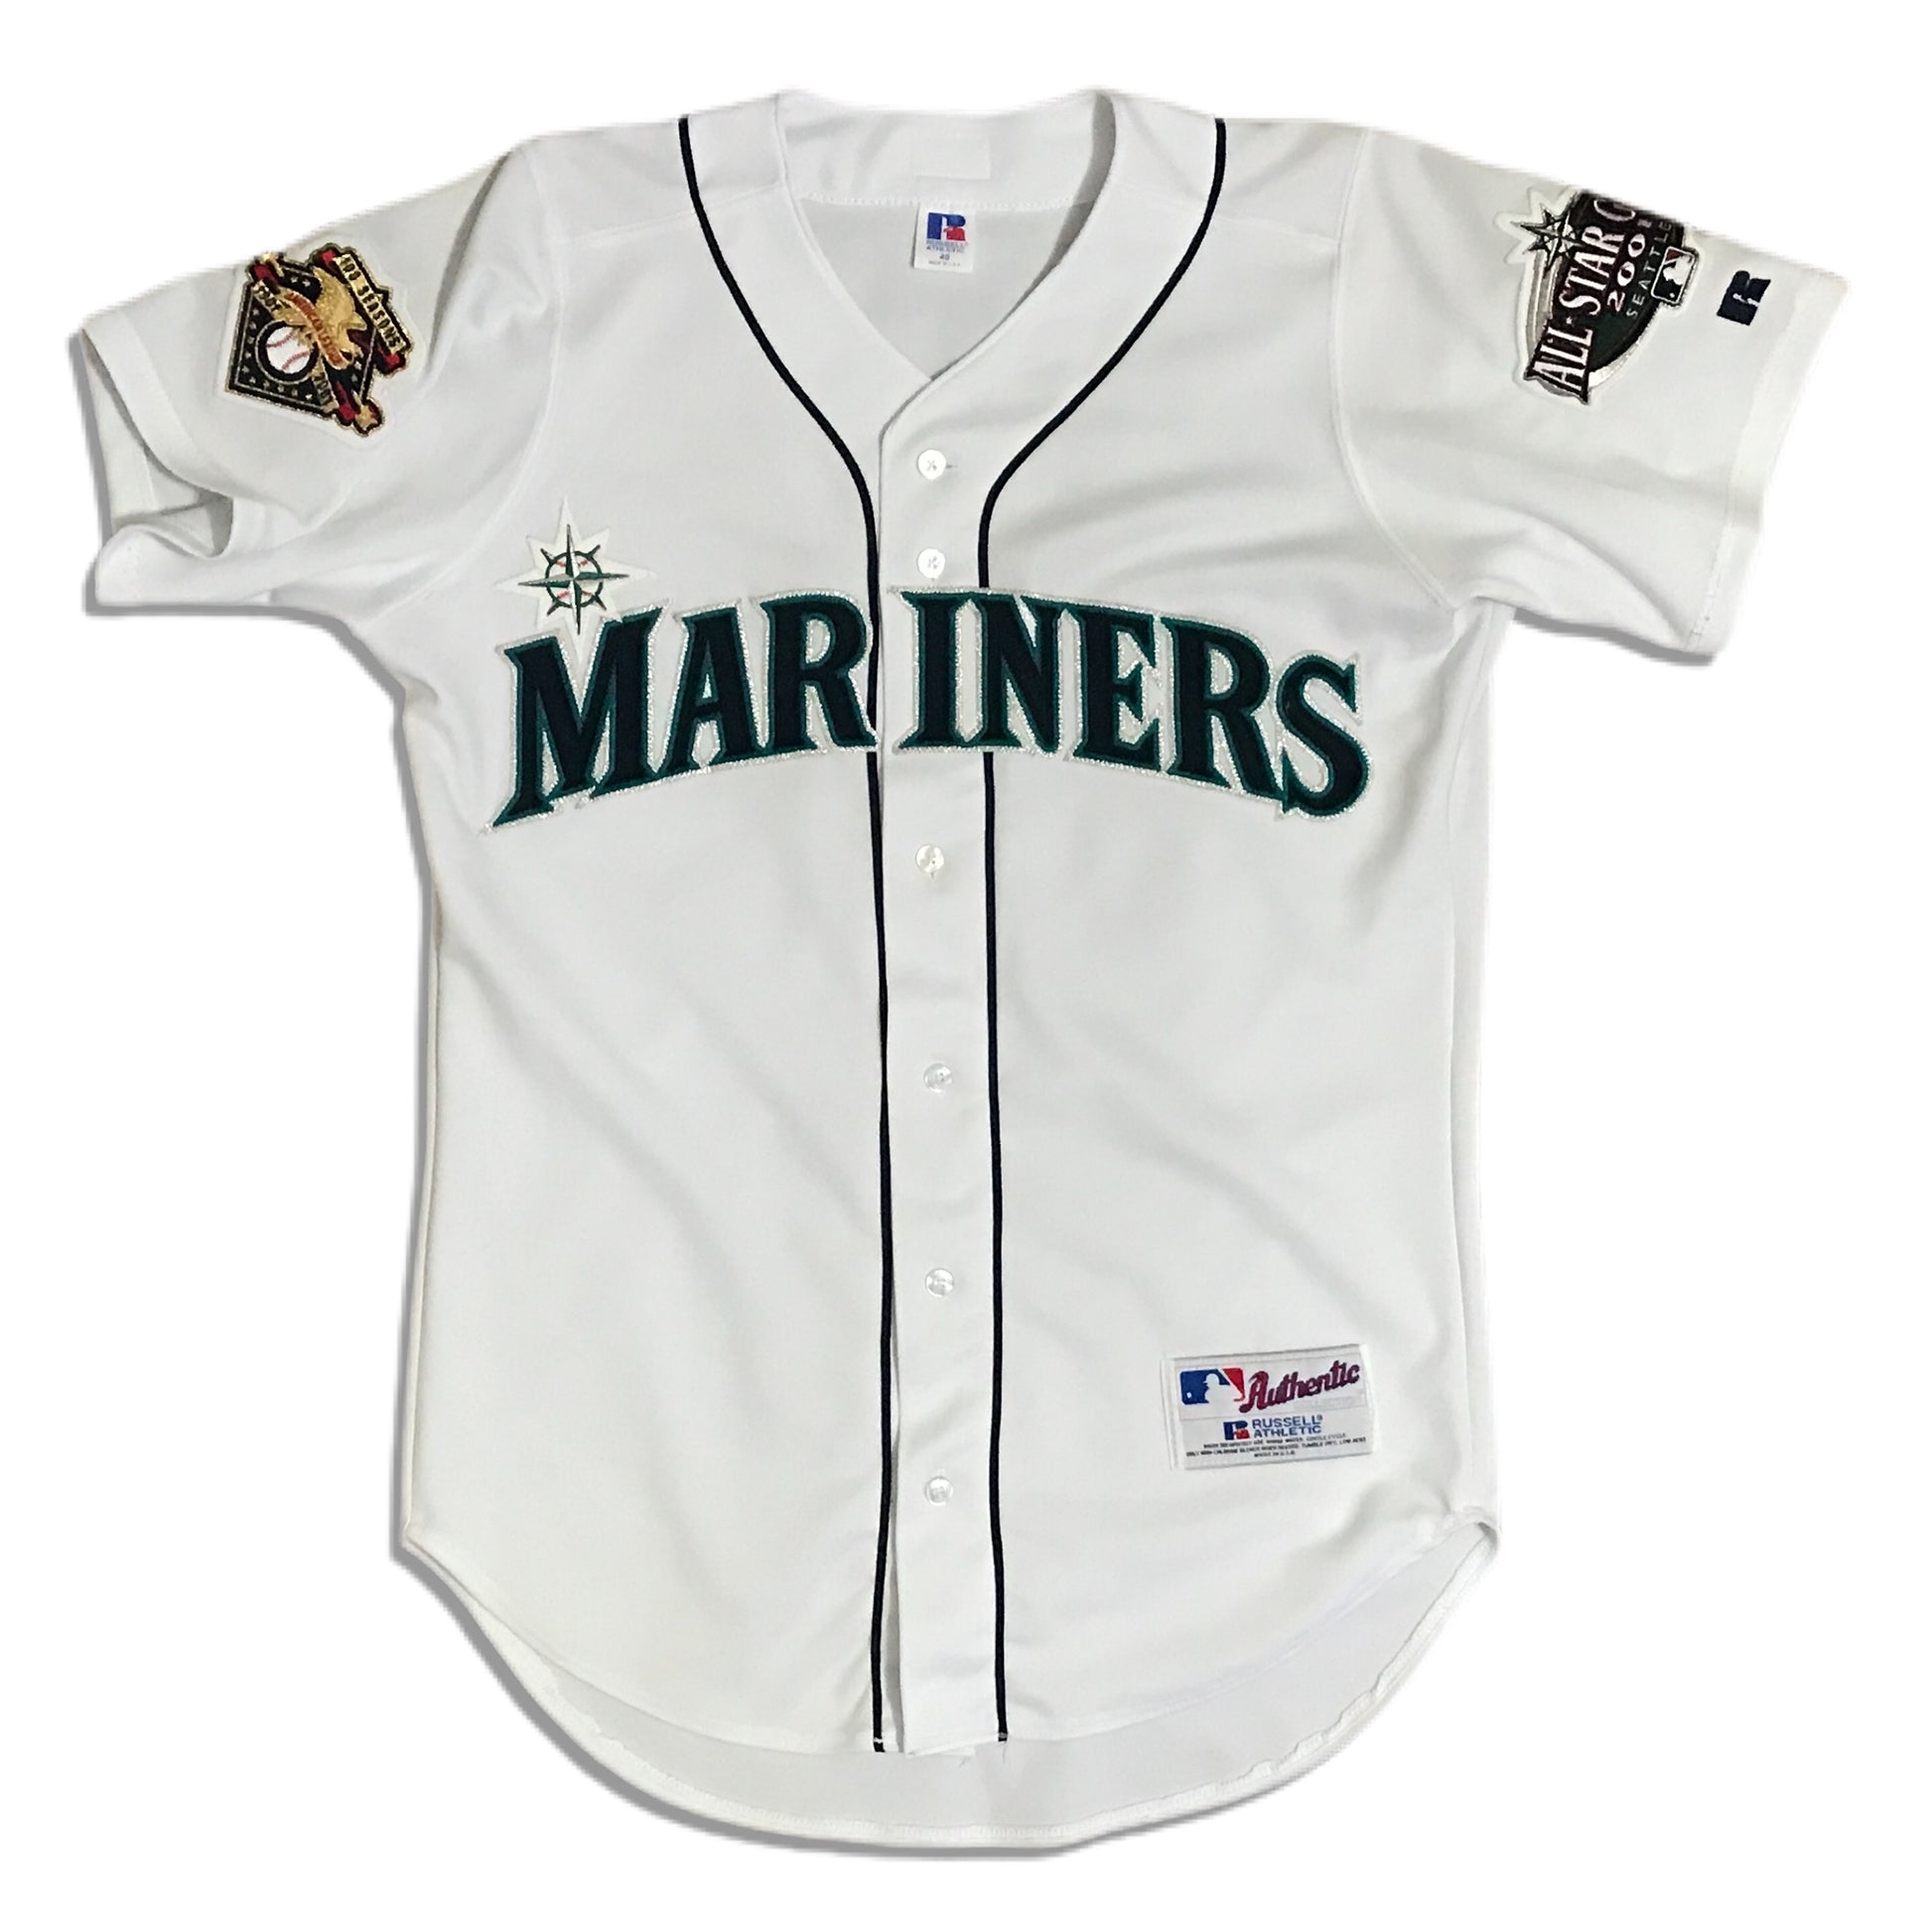 Seattle Mariners All Star Game Gear, Mariners All Star Game Jerseys, All  Star Game Merchandise